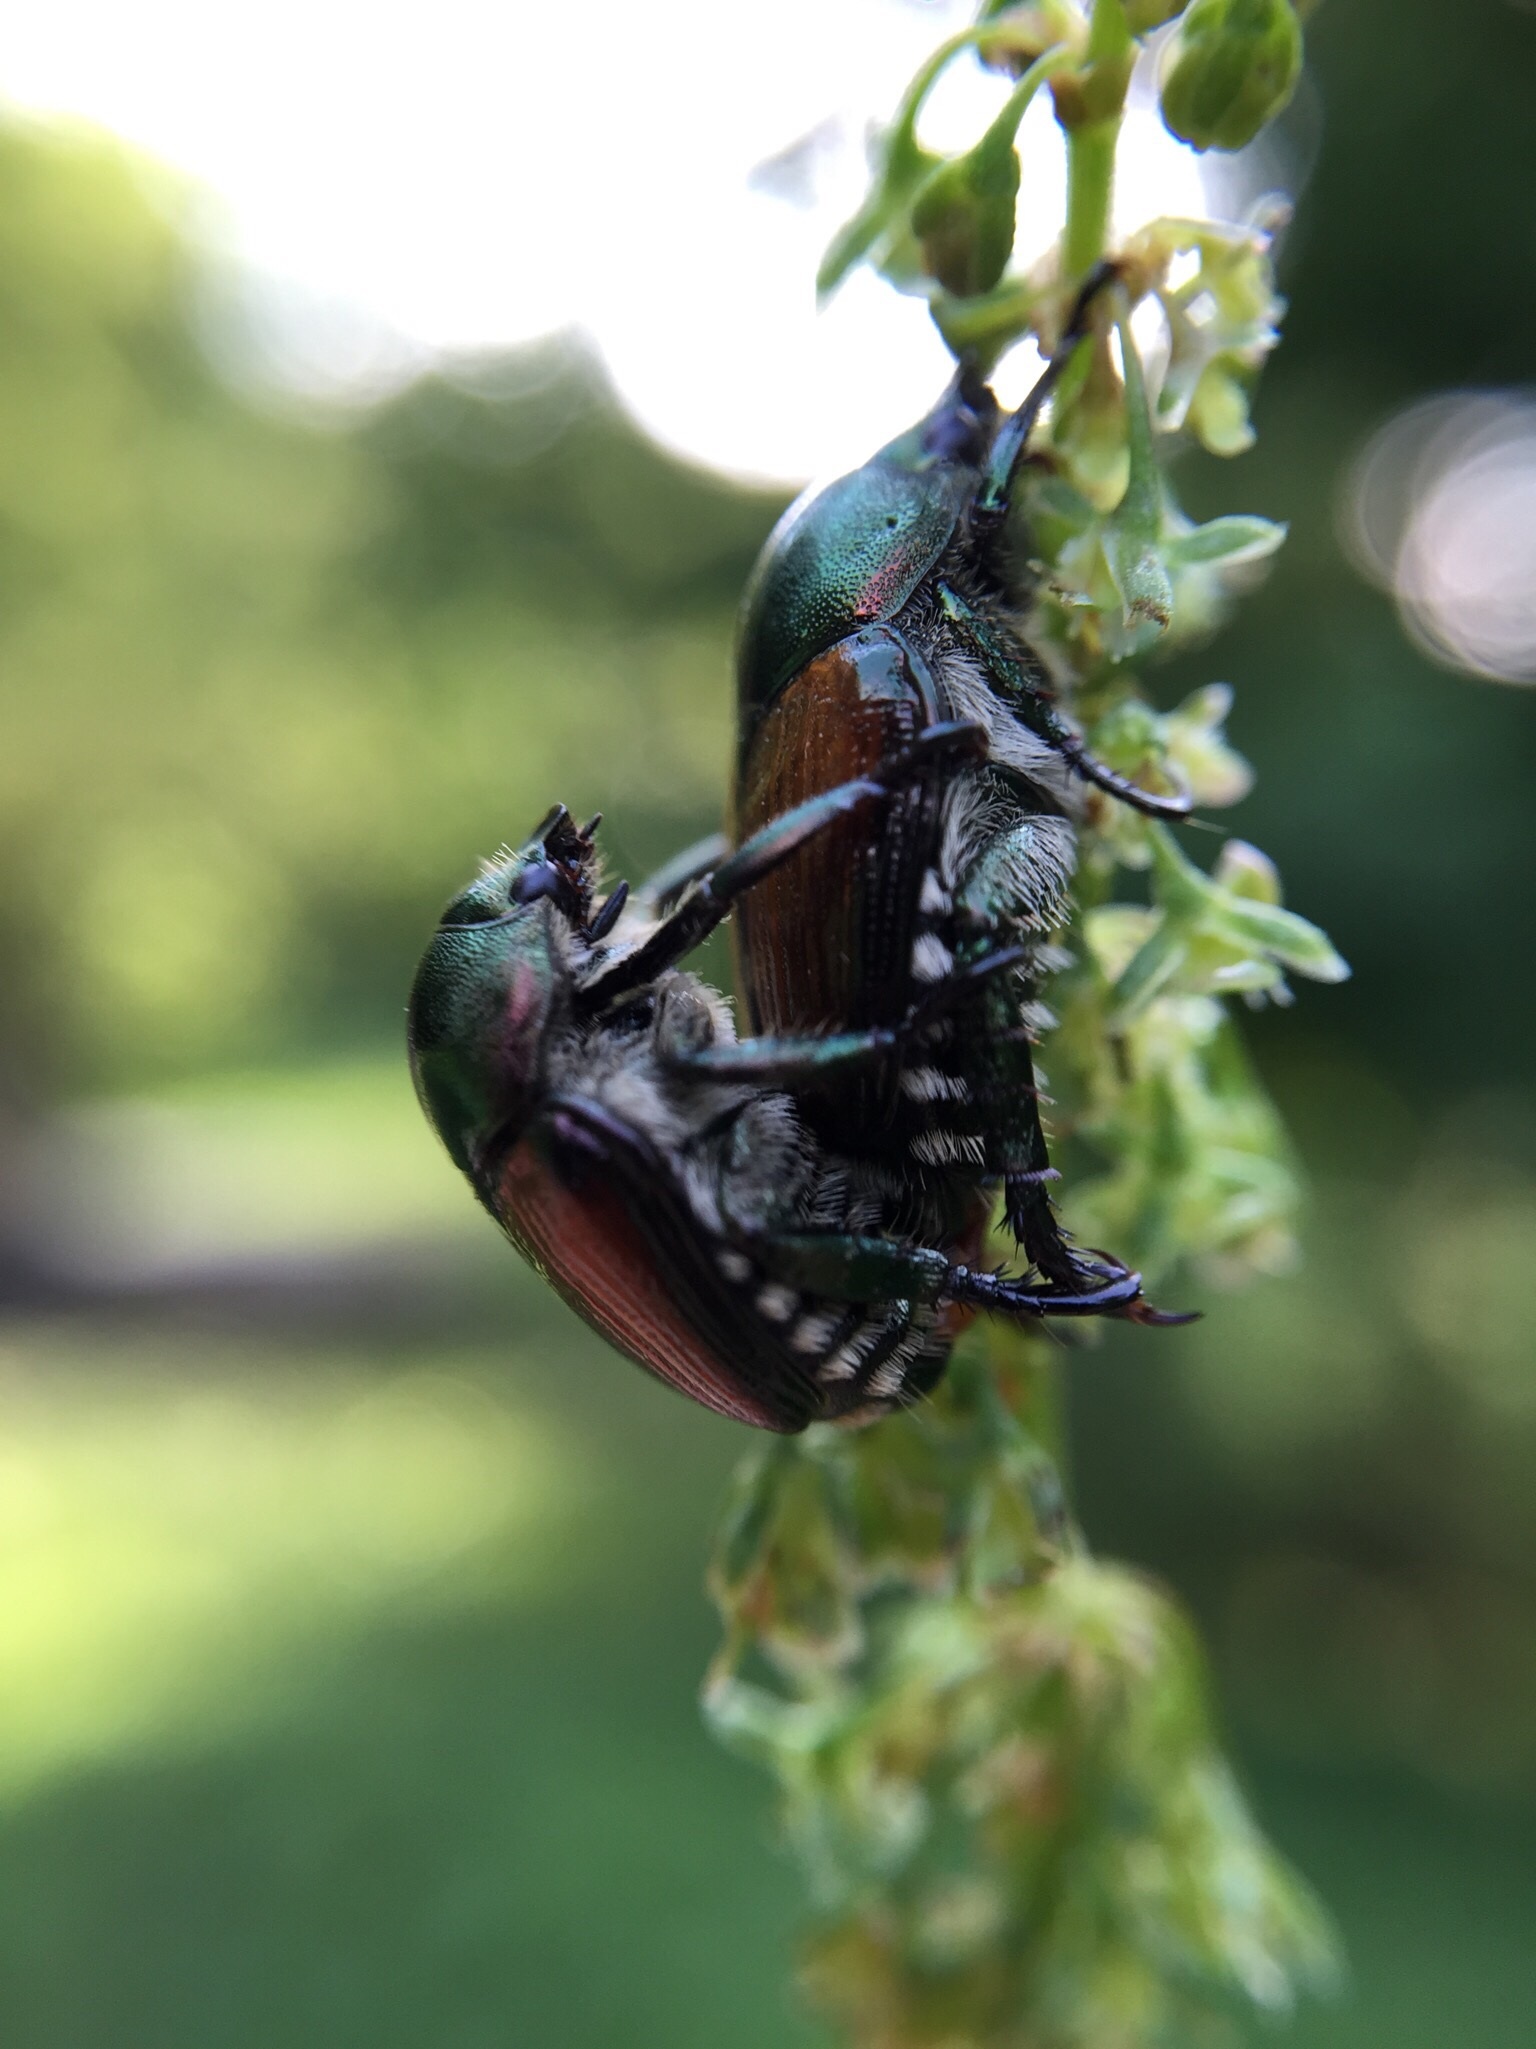 Beetle Love Nature Free Image Download